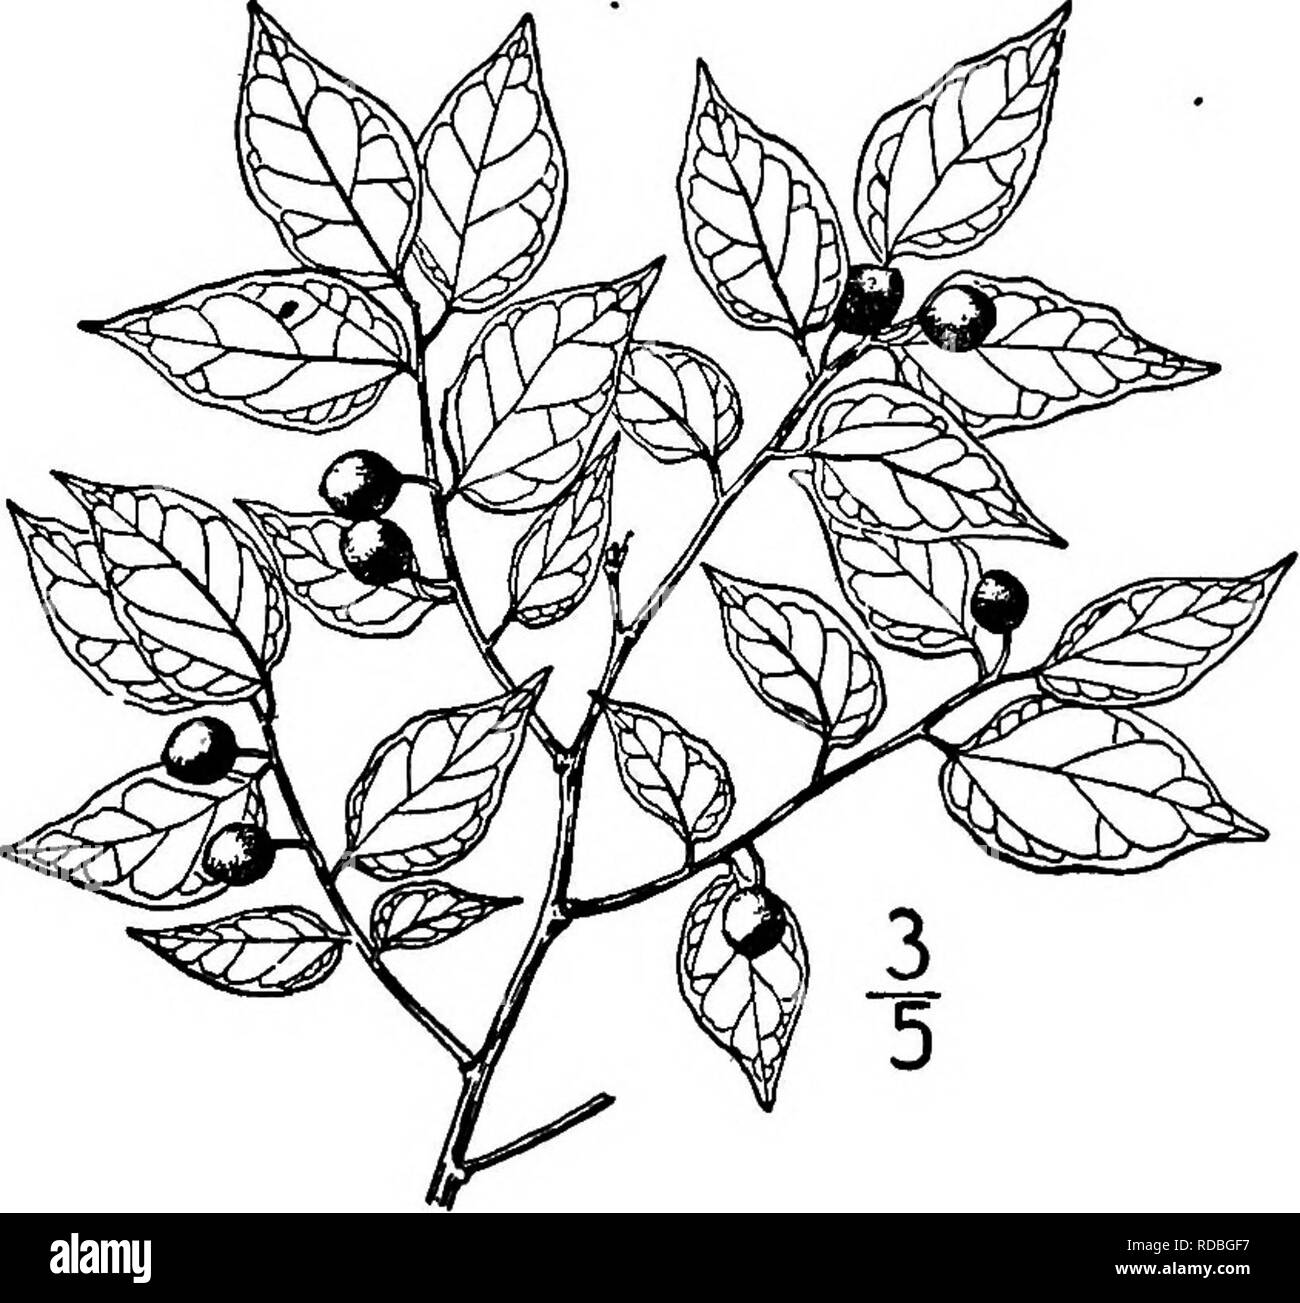 . North American trees : being descriptions and illustrations of the trees growing independently of cultivation in North America, north of Mexico and the West Indies . Trees. Fig. 315. — Small's Hackberry. 6. GEORGIA HACKBERRY - Celtis georgiana Small The Georgia hackberry in- habits rocky or gravelly soil and ranges from New Jefsey to Florida, Kentucky, Missouri, and Alabama. It is usually a mere shrub, sometimes flowering when 2 meters high or less, but some- times becomes a tree 6 to 10 me- ters high. The young twigs are hairy, greenish, slender, becoming smooth and purple-brown. The leaves Stock Photo